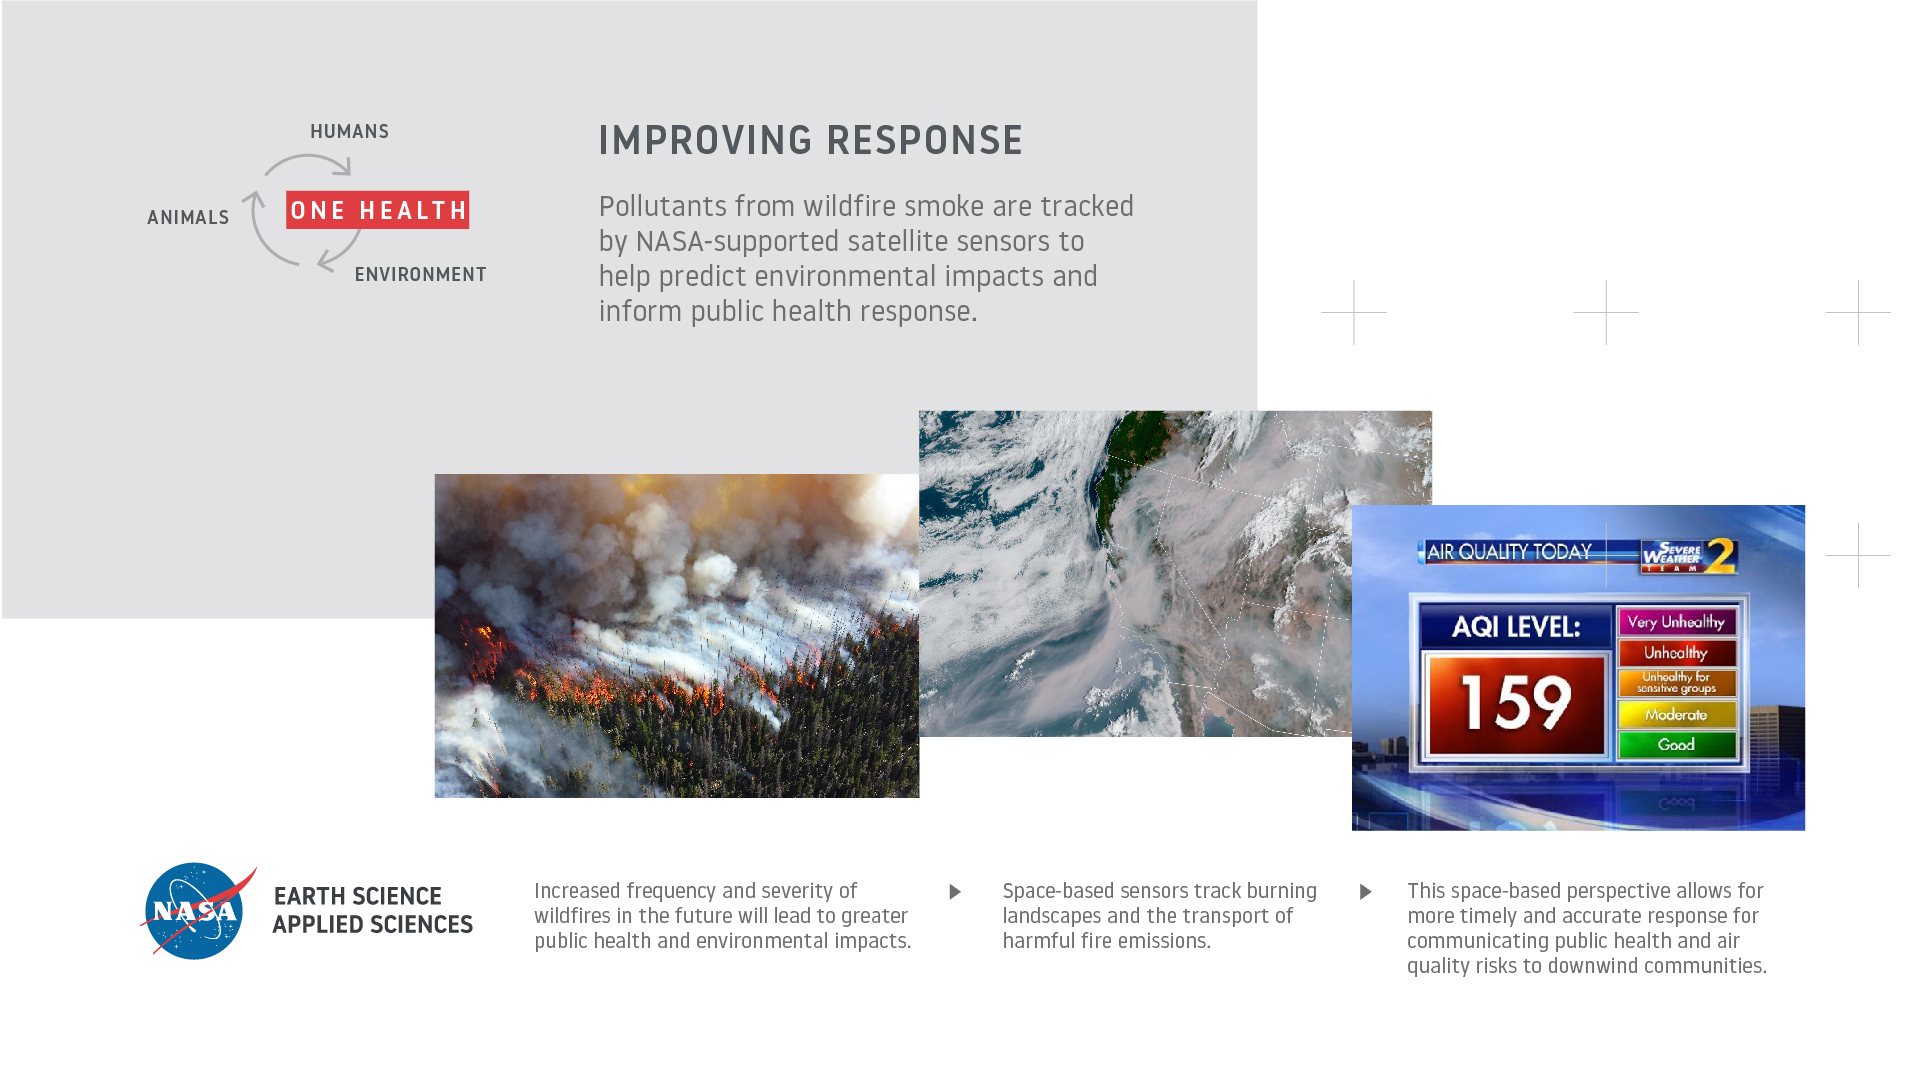 Improving Response to Wildfires